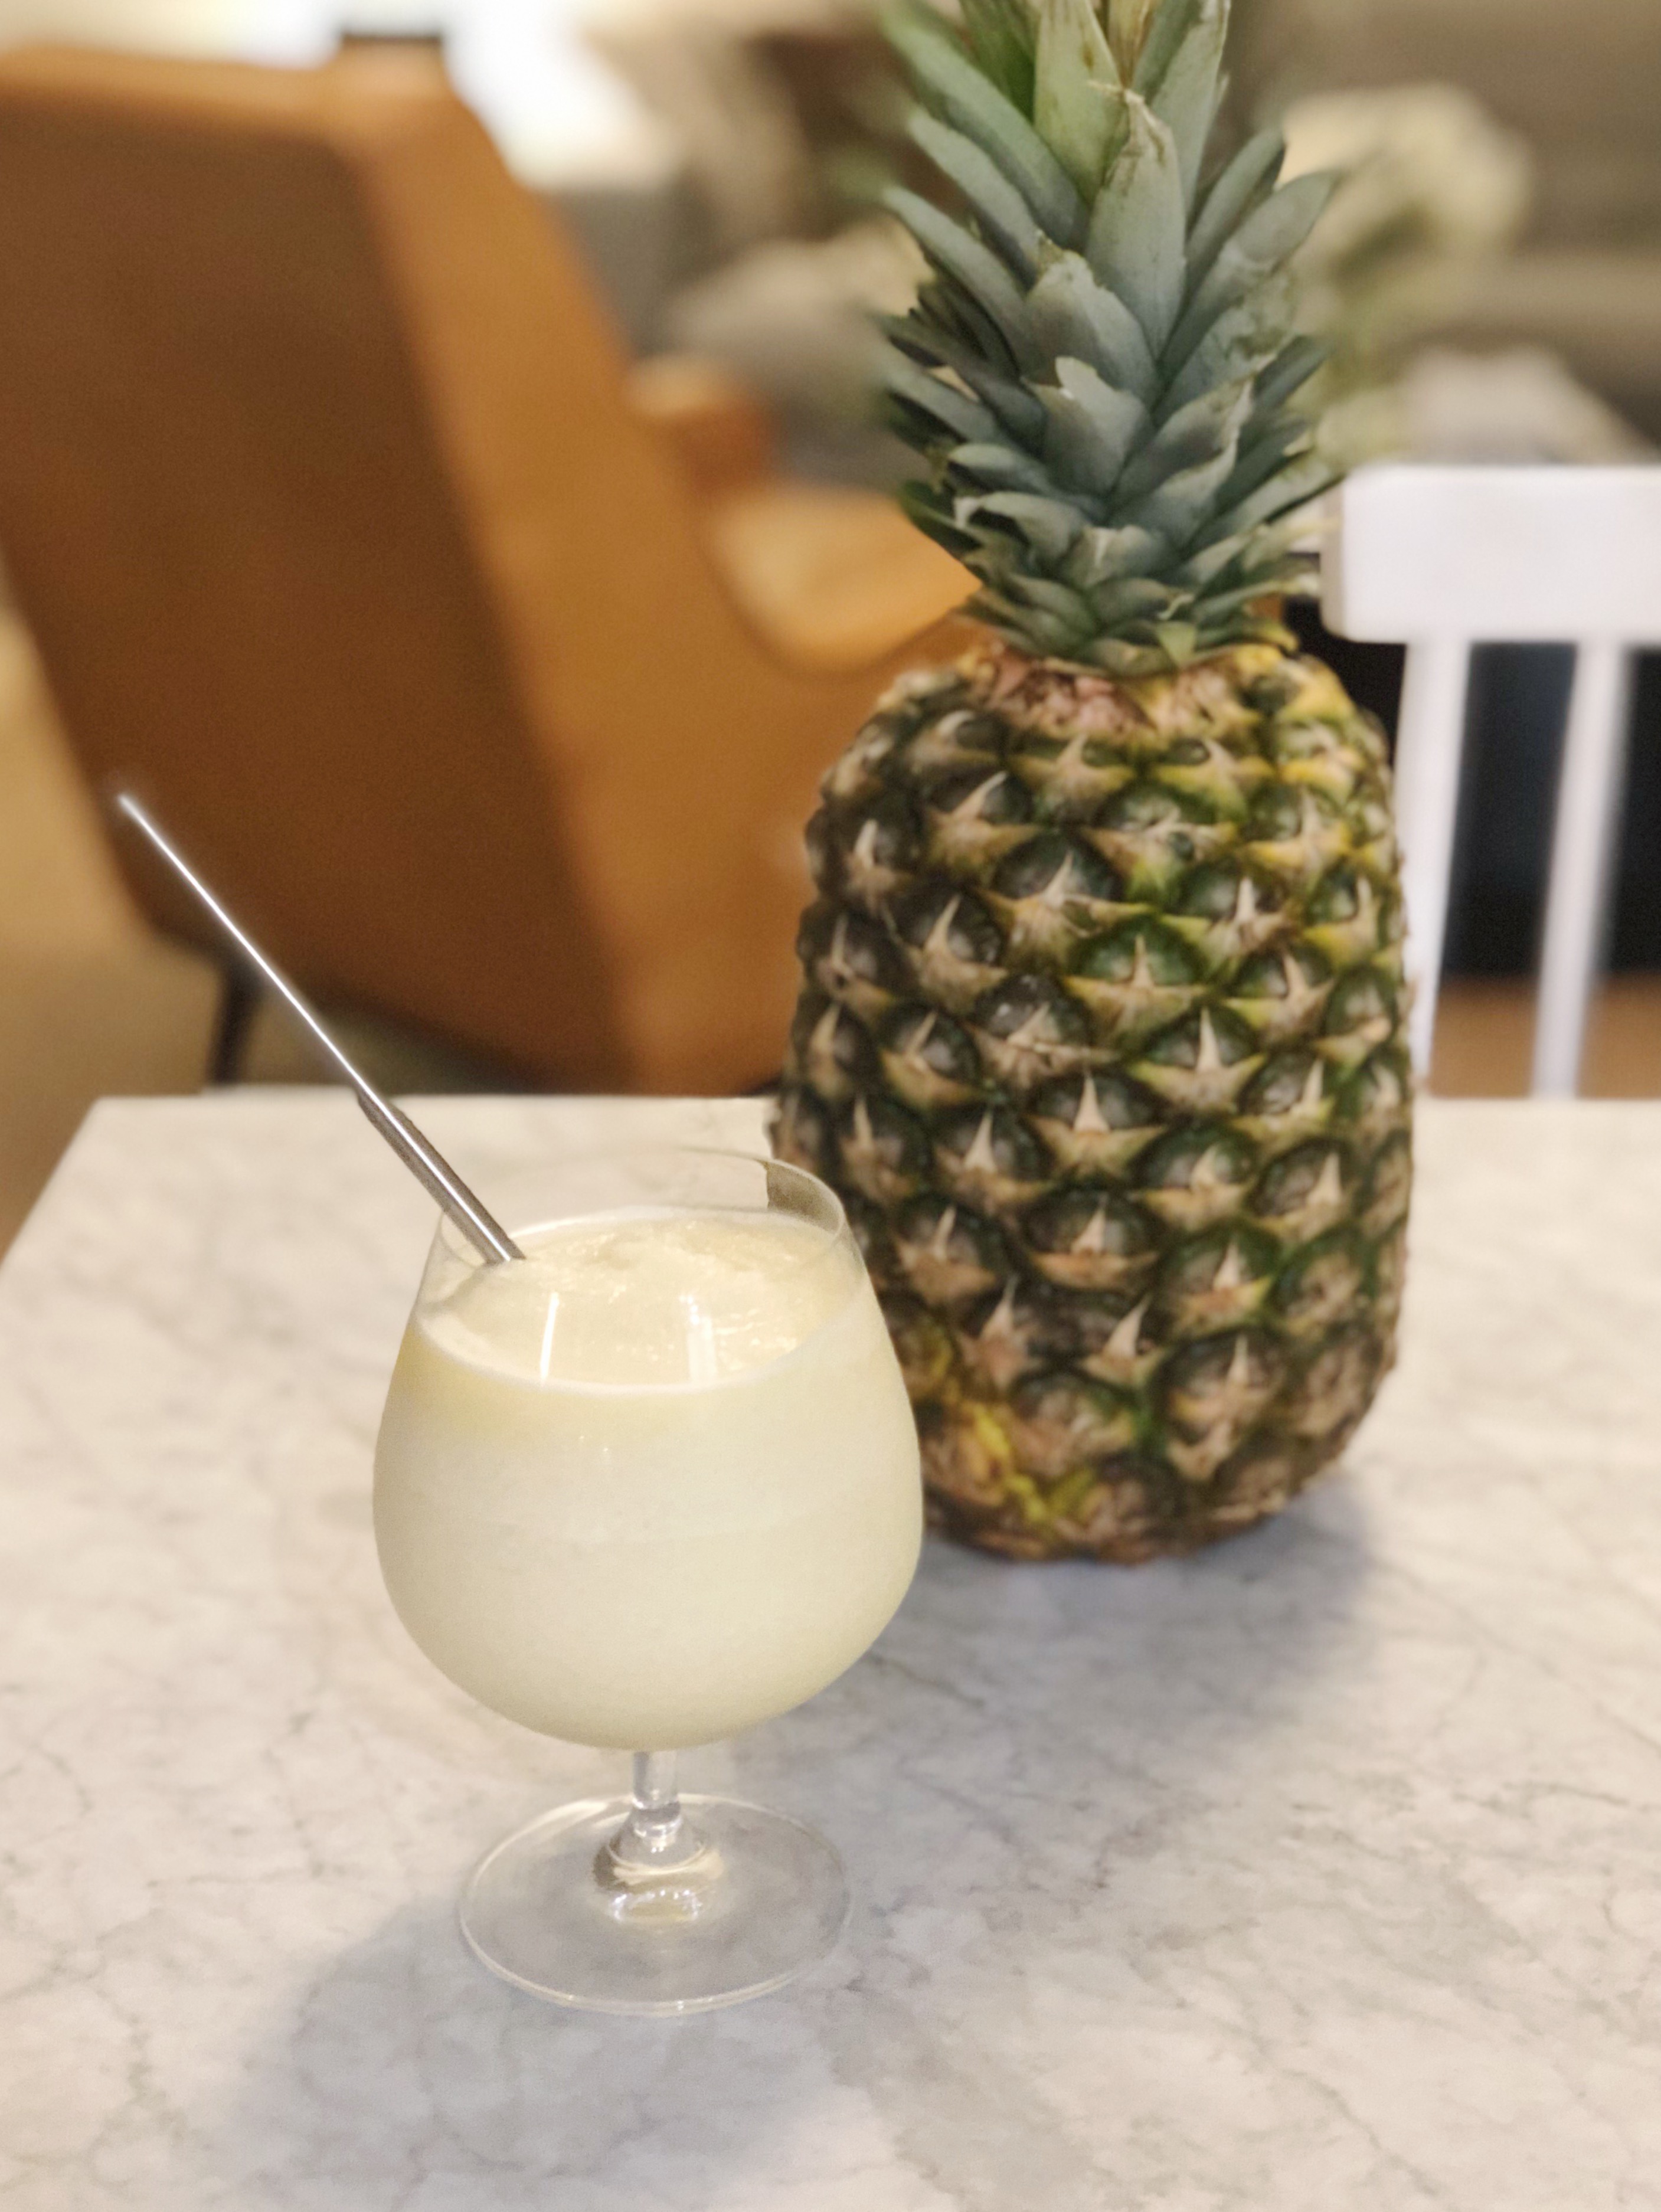 Beach party date night with pina coladas